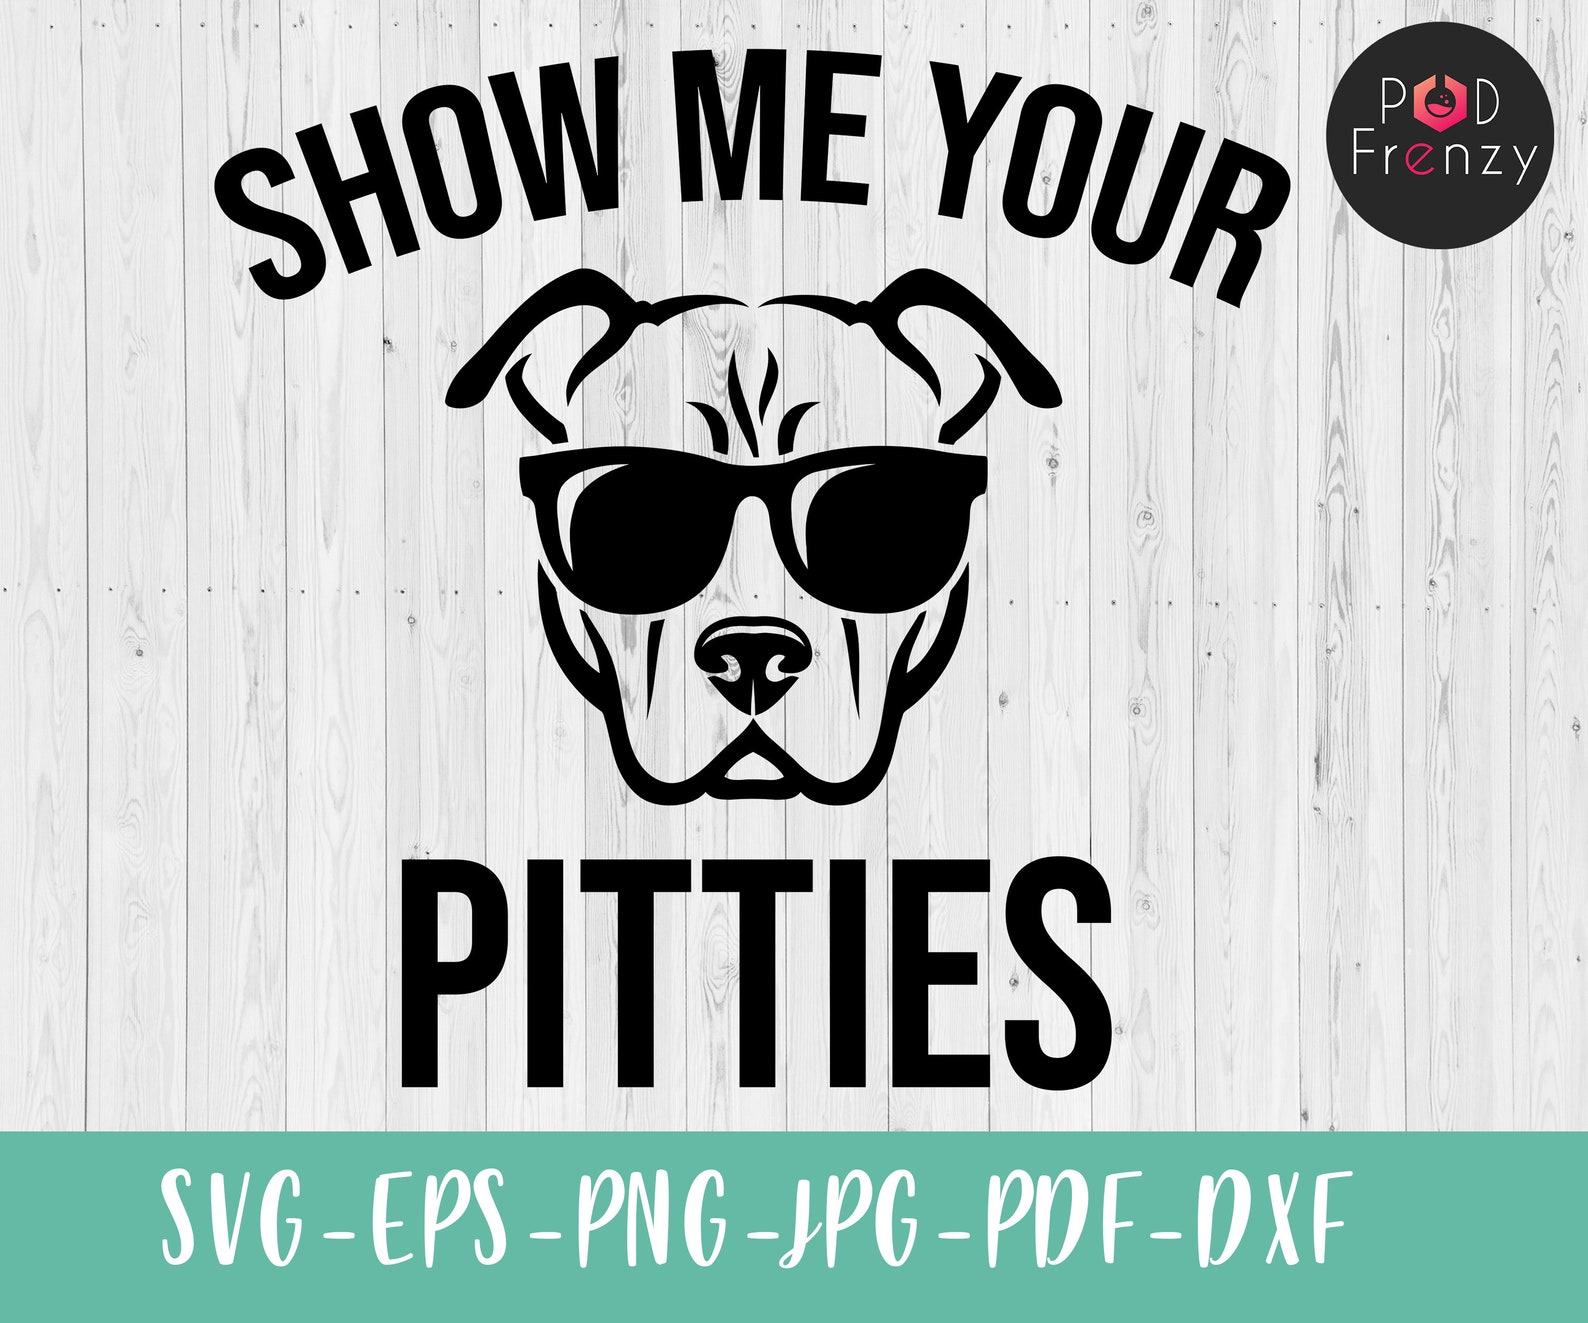 Show Me Your Pitties Svg Silhouette Cutting File Digital - Etsy